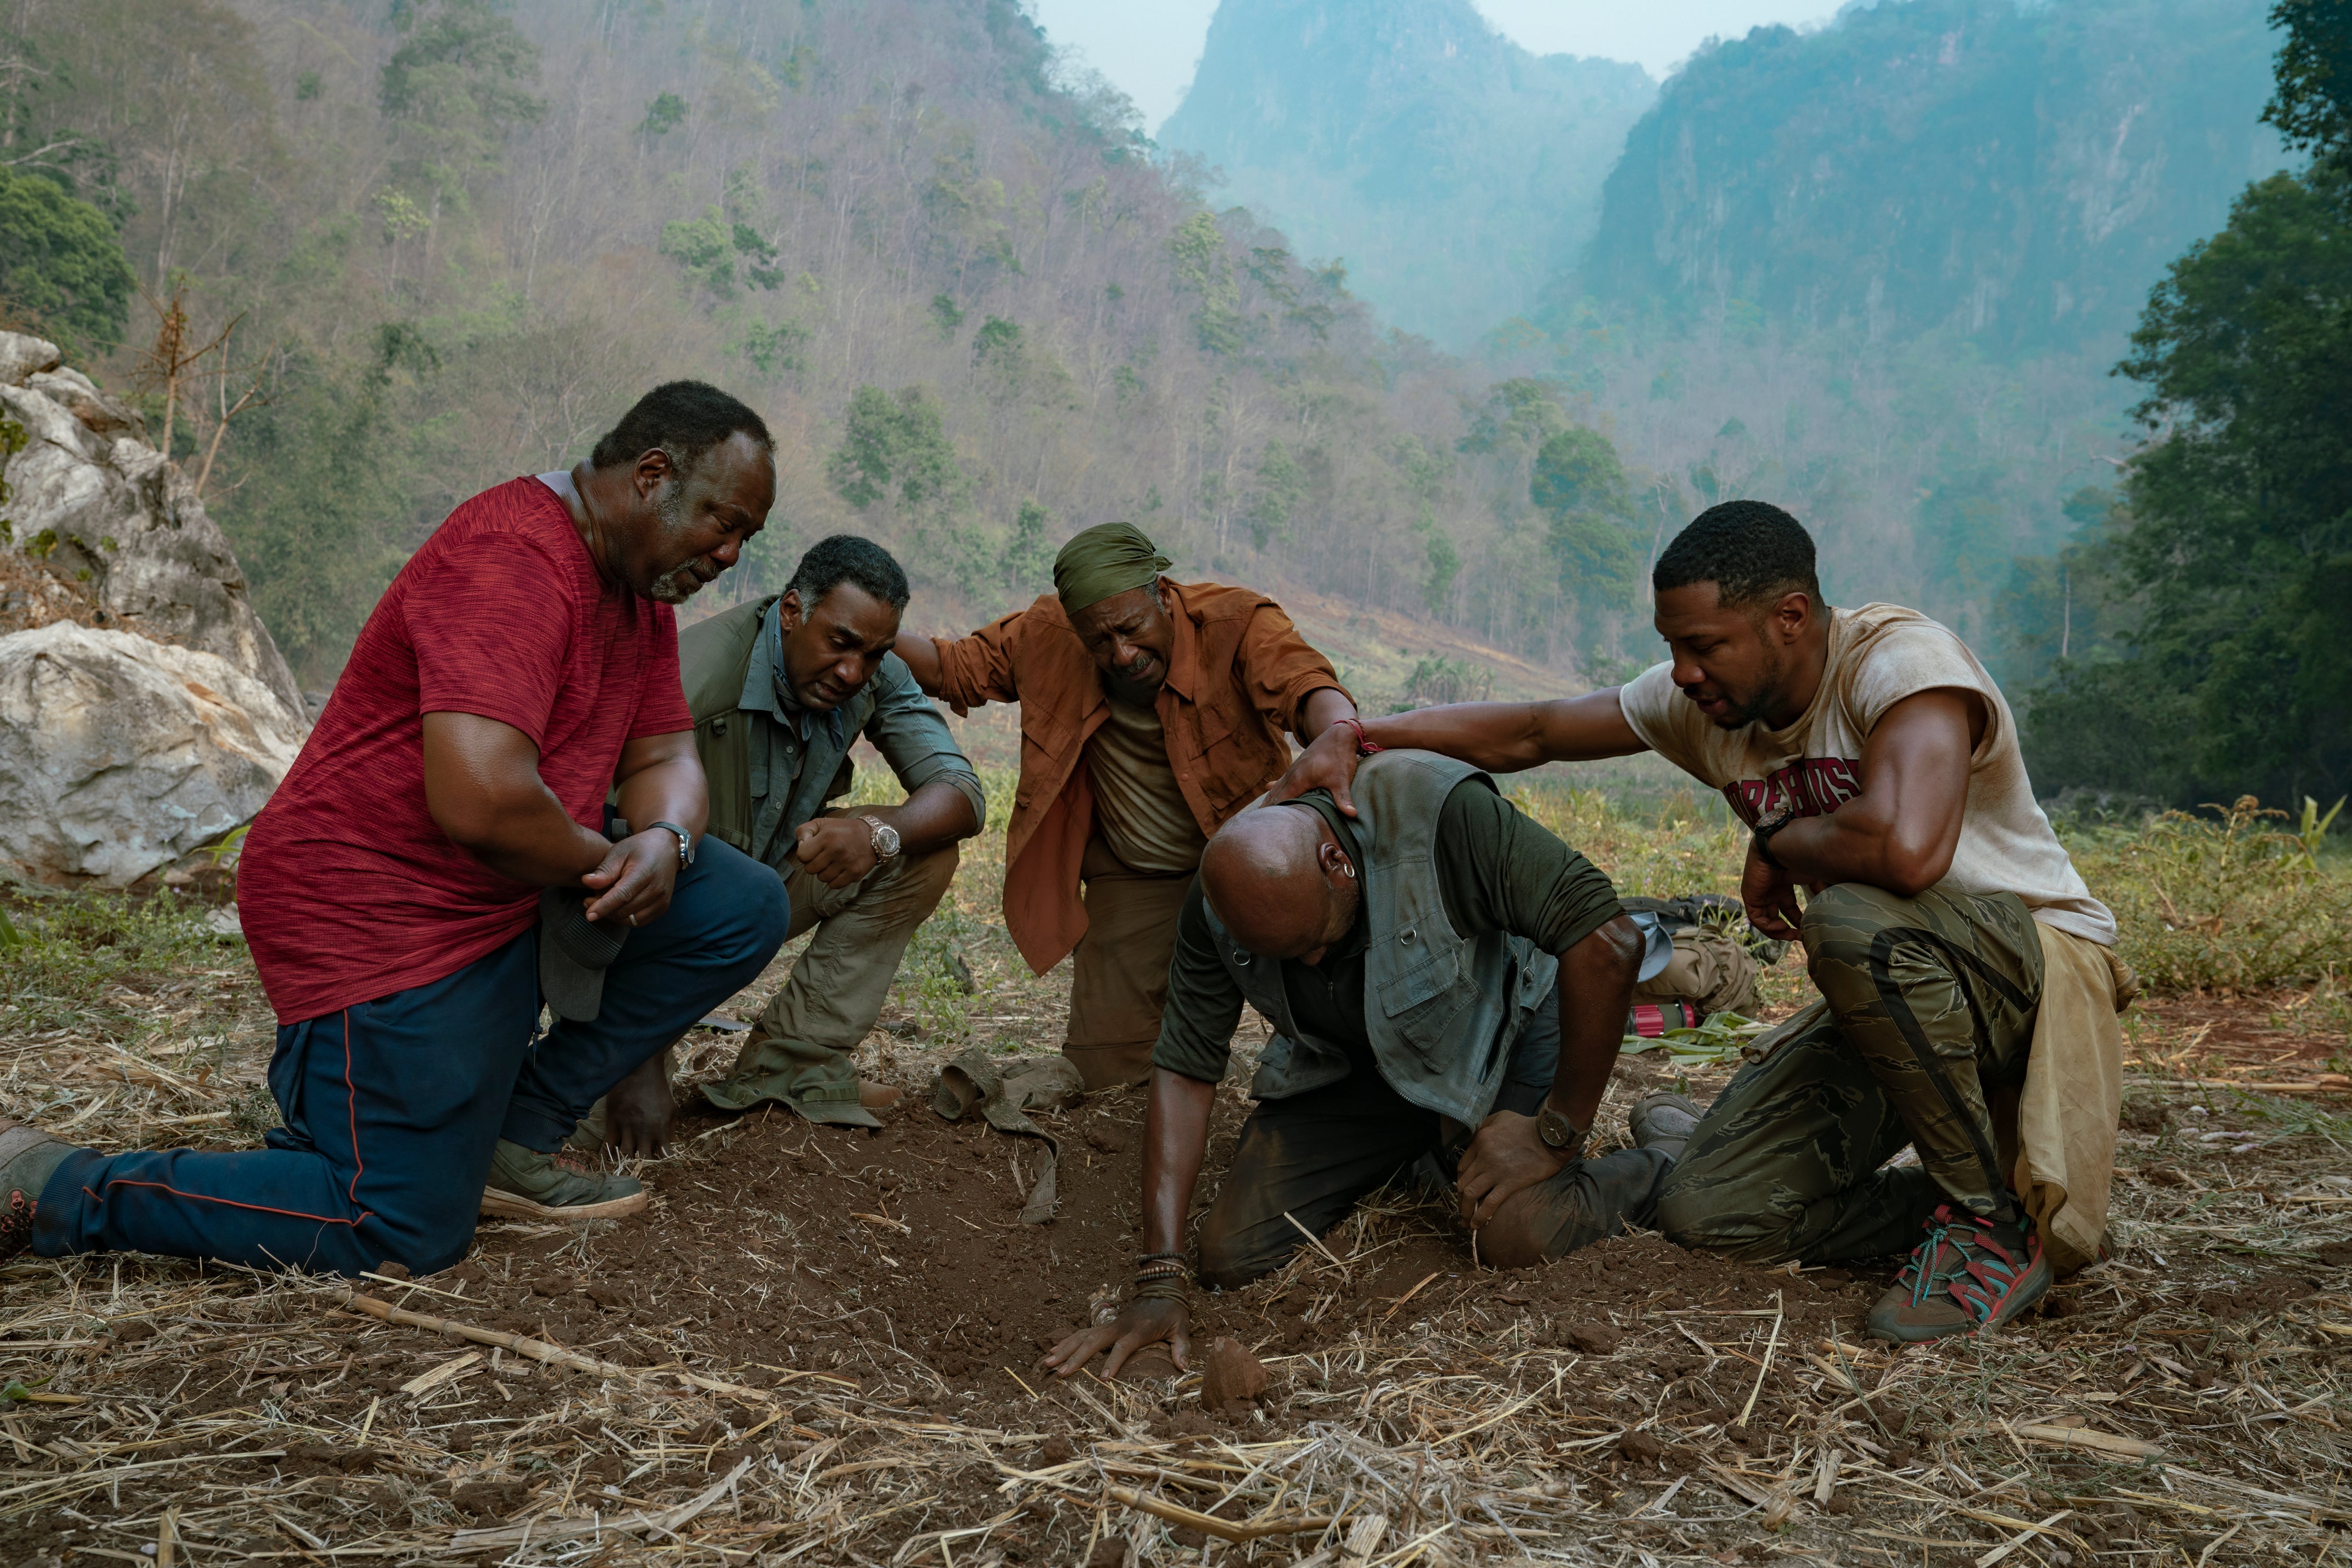 Still from Da 5 Bloods shows actors Delroy Lindo, Clarke Peters, Isiah Whitlock Jr., Norm Lewis, and Jonathan Majors kneeling solemnly around a hole in the ground.